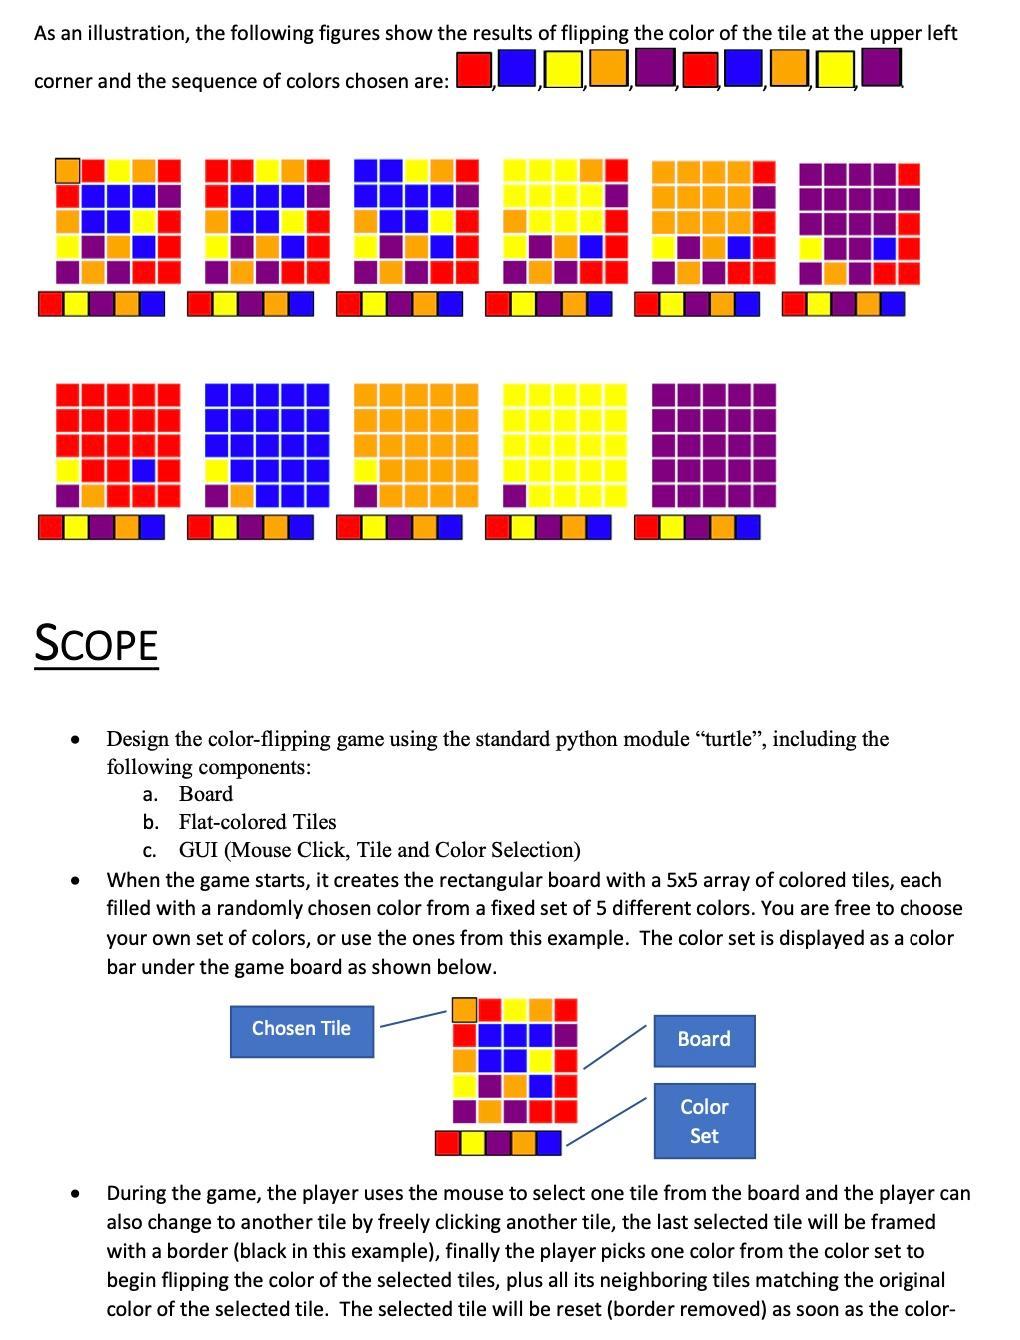 As an illustration, the following figures show the results of flipping the color of the tile at the upper left corner and the